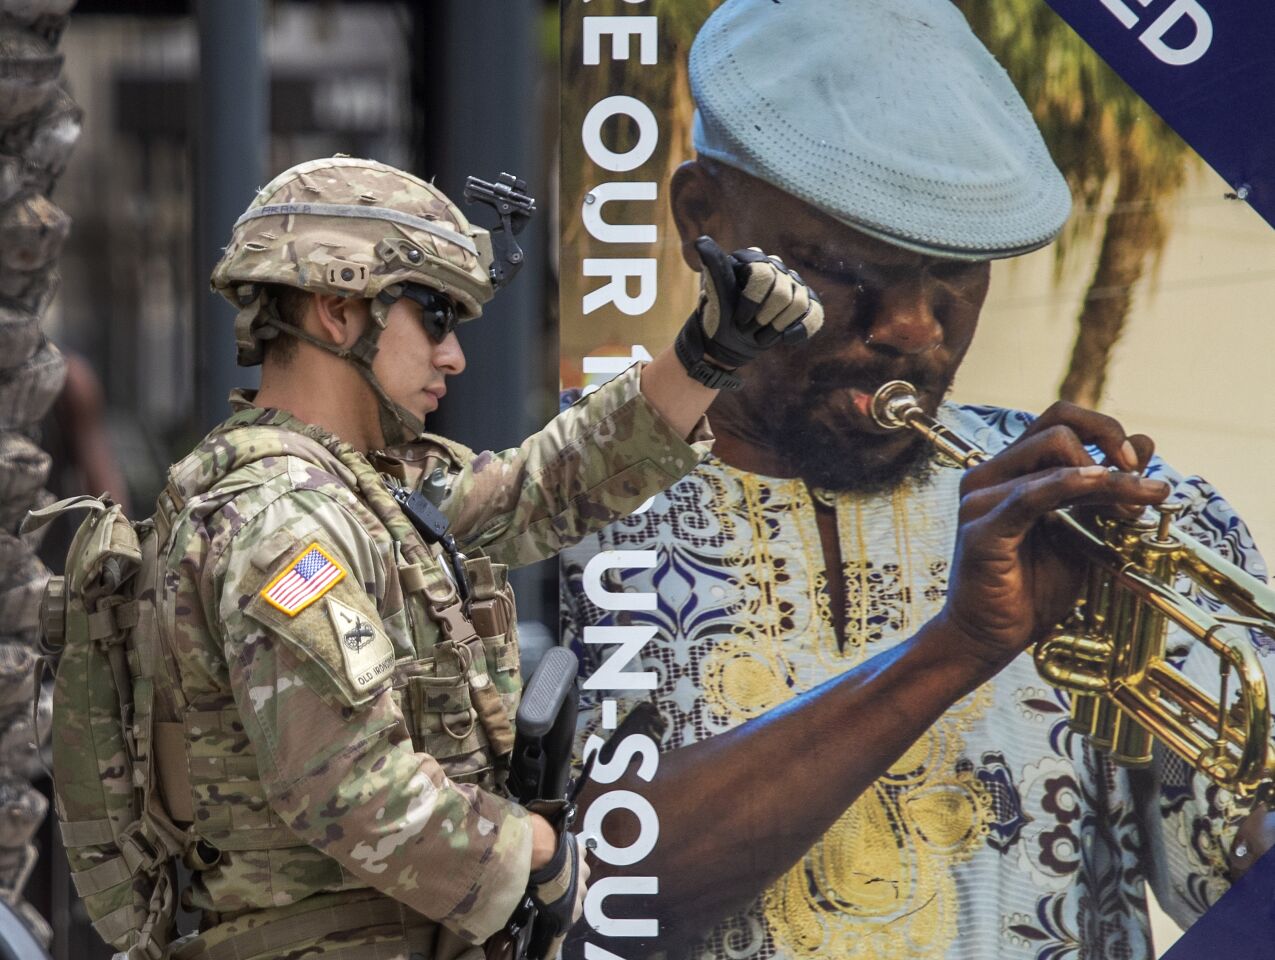 A California National Guard soldier acknowledges a supporter.